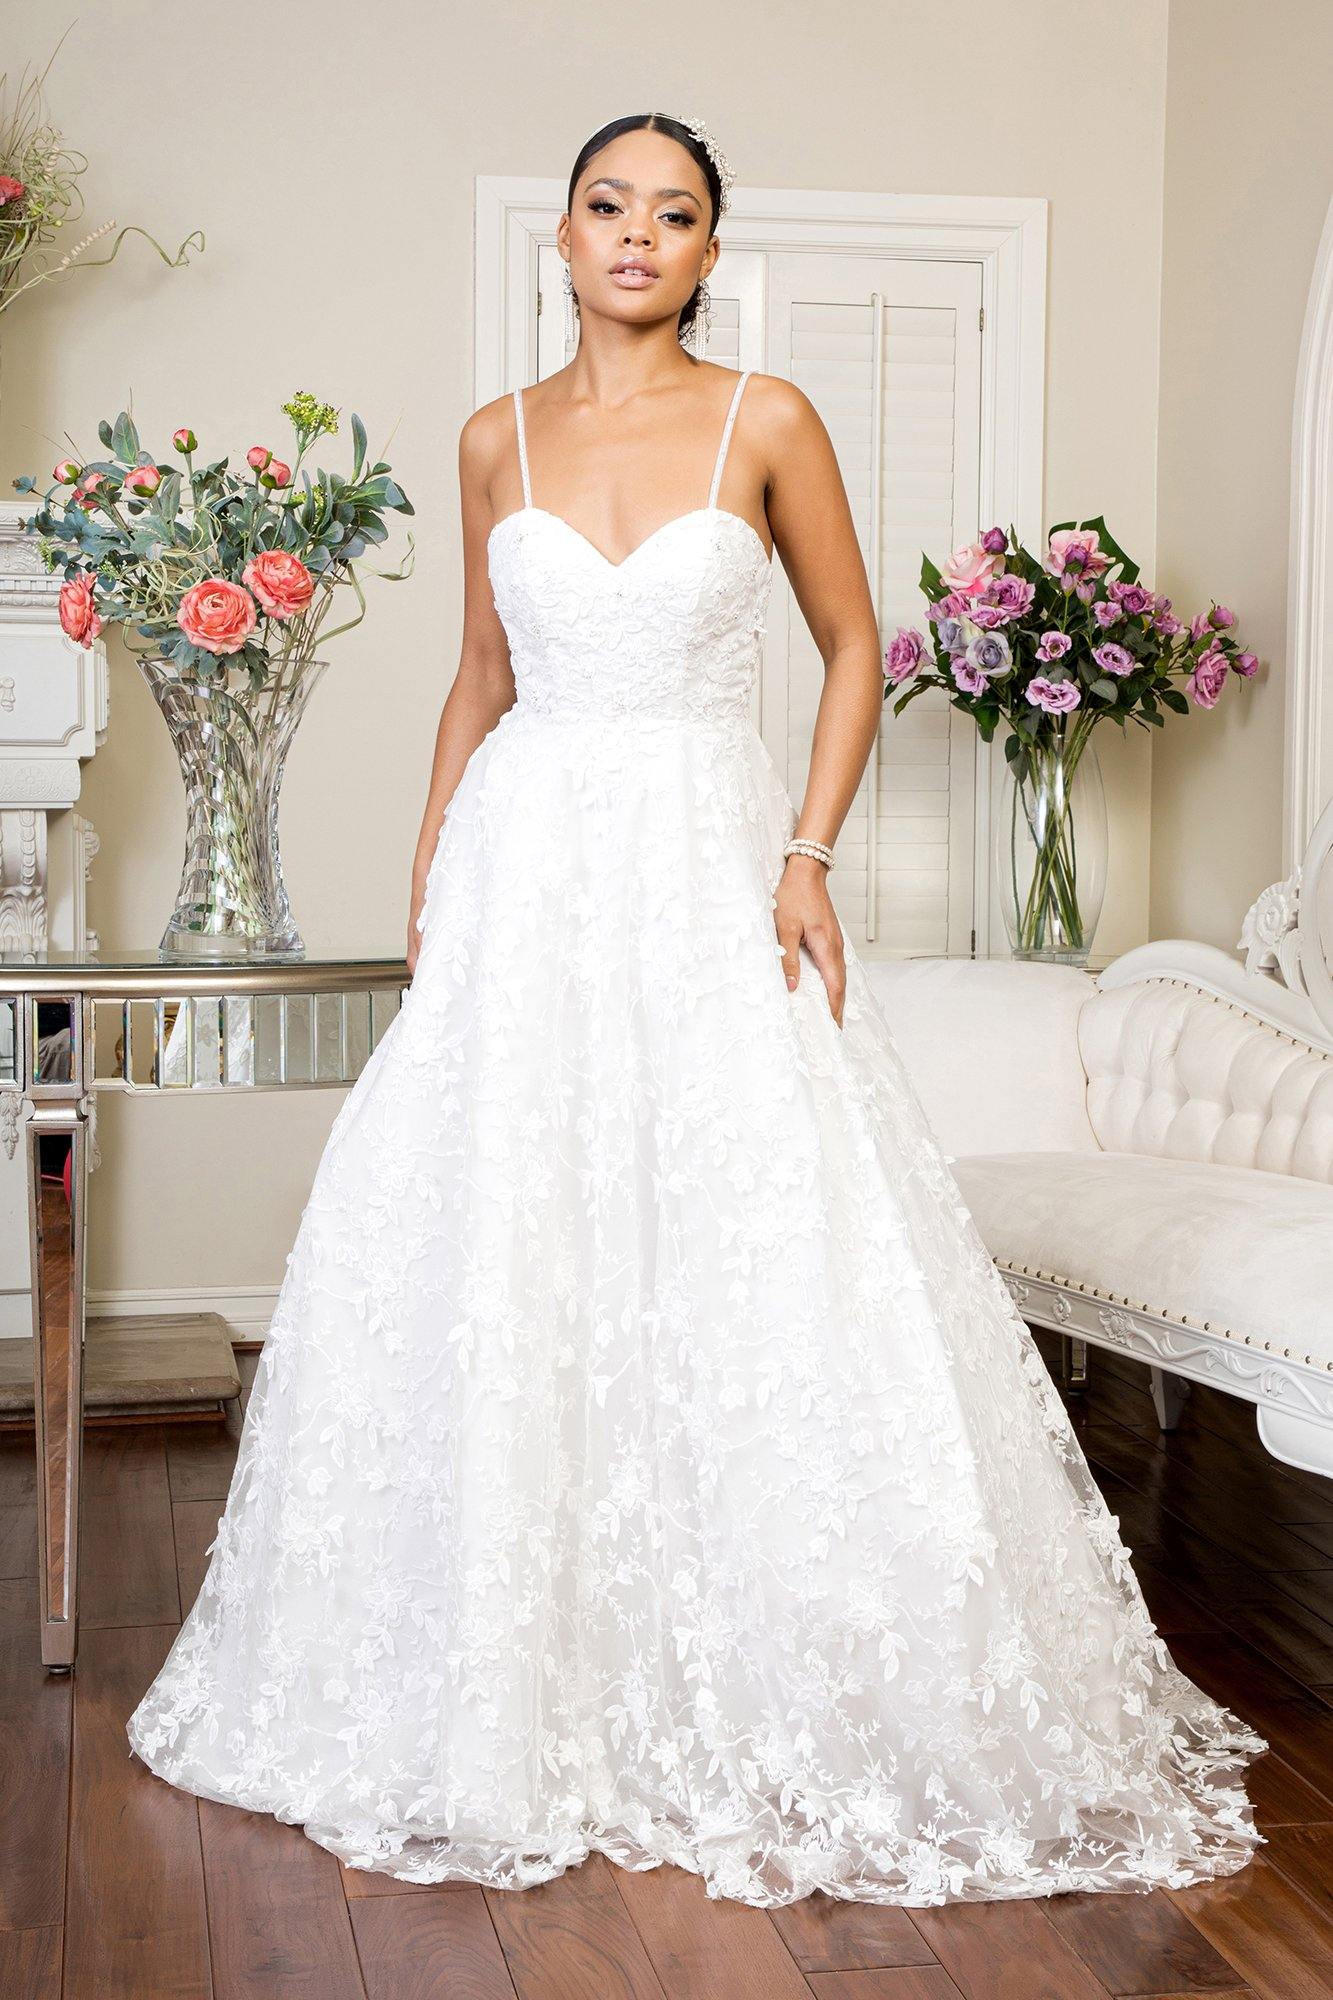 Simple Long Spaghetti Strap Floral Mesh Wedding Gown - The Dress Outlet